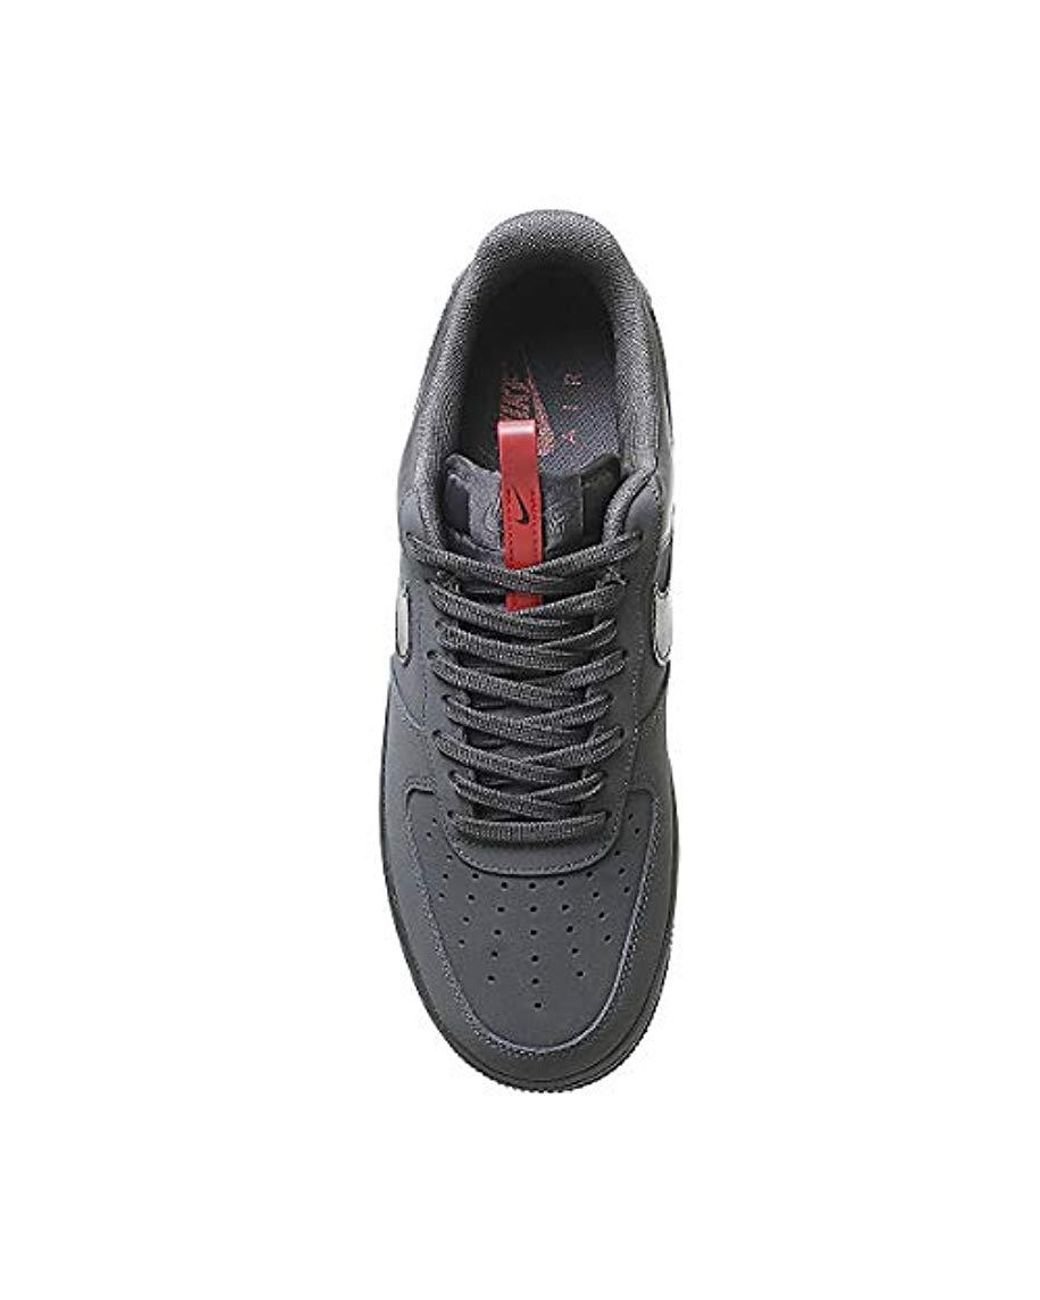 Nike Air Force 1 S Trainers Size 15 Uk Dark Grey Anthracite Black  University Red Shoes Bq4326-001 in Dark Grey Black Red (Grey) for Men |  Lyst UK